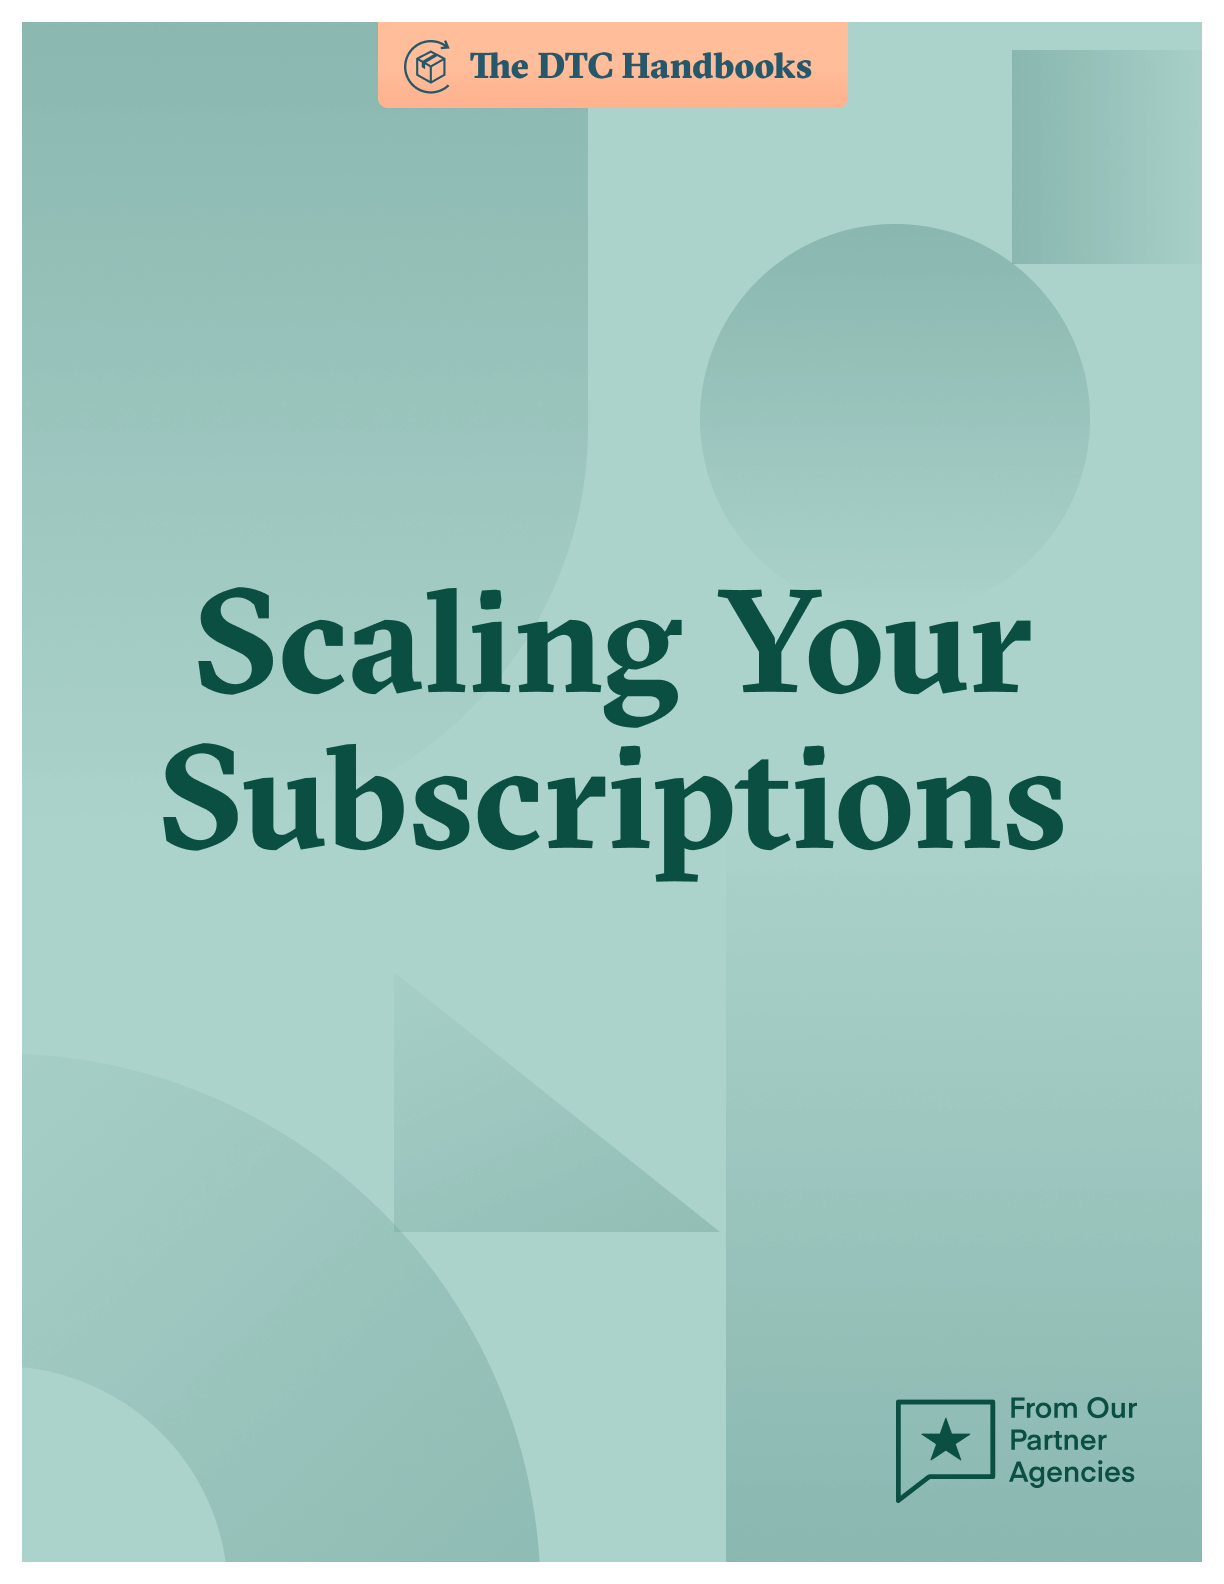 Scaling Subscriptions